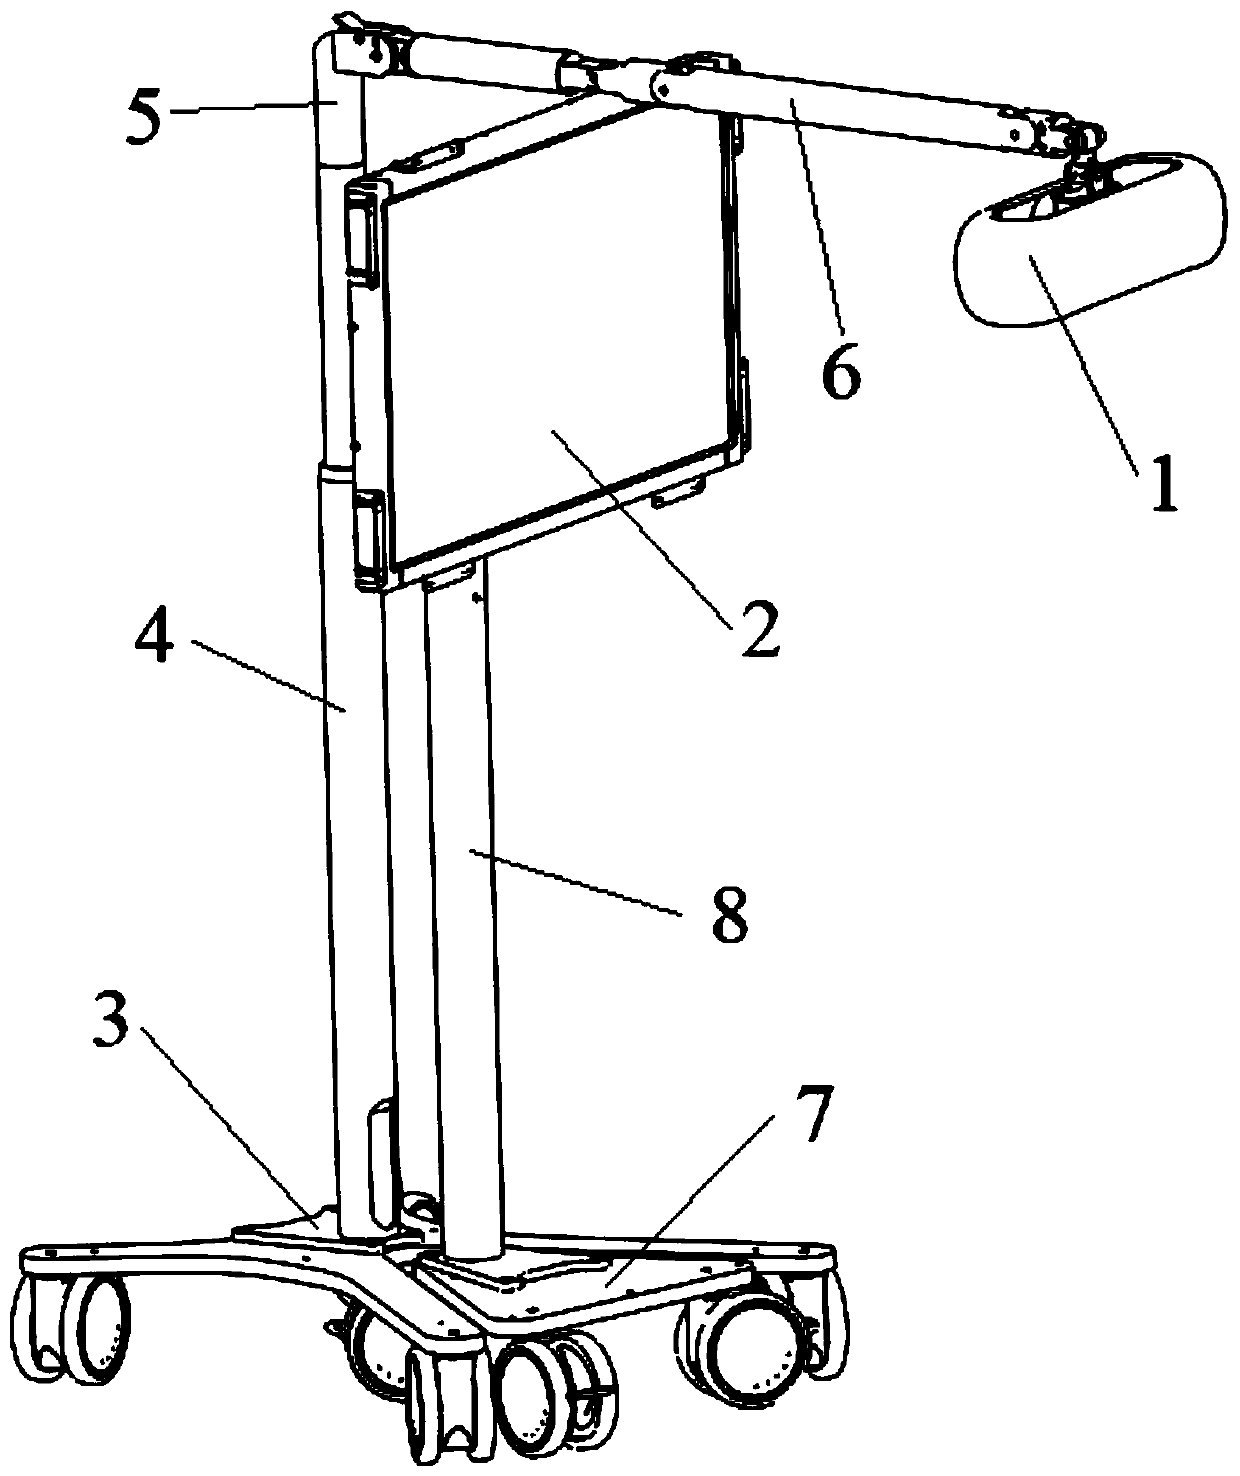 Support adjustment device